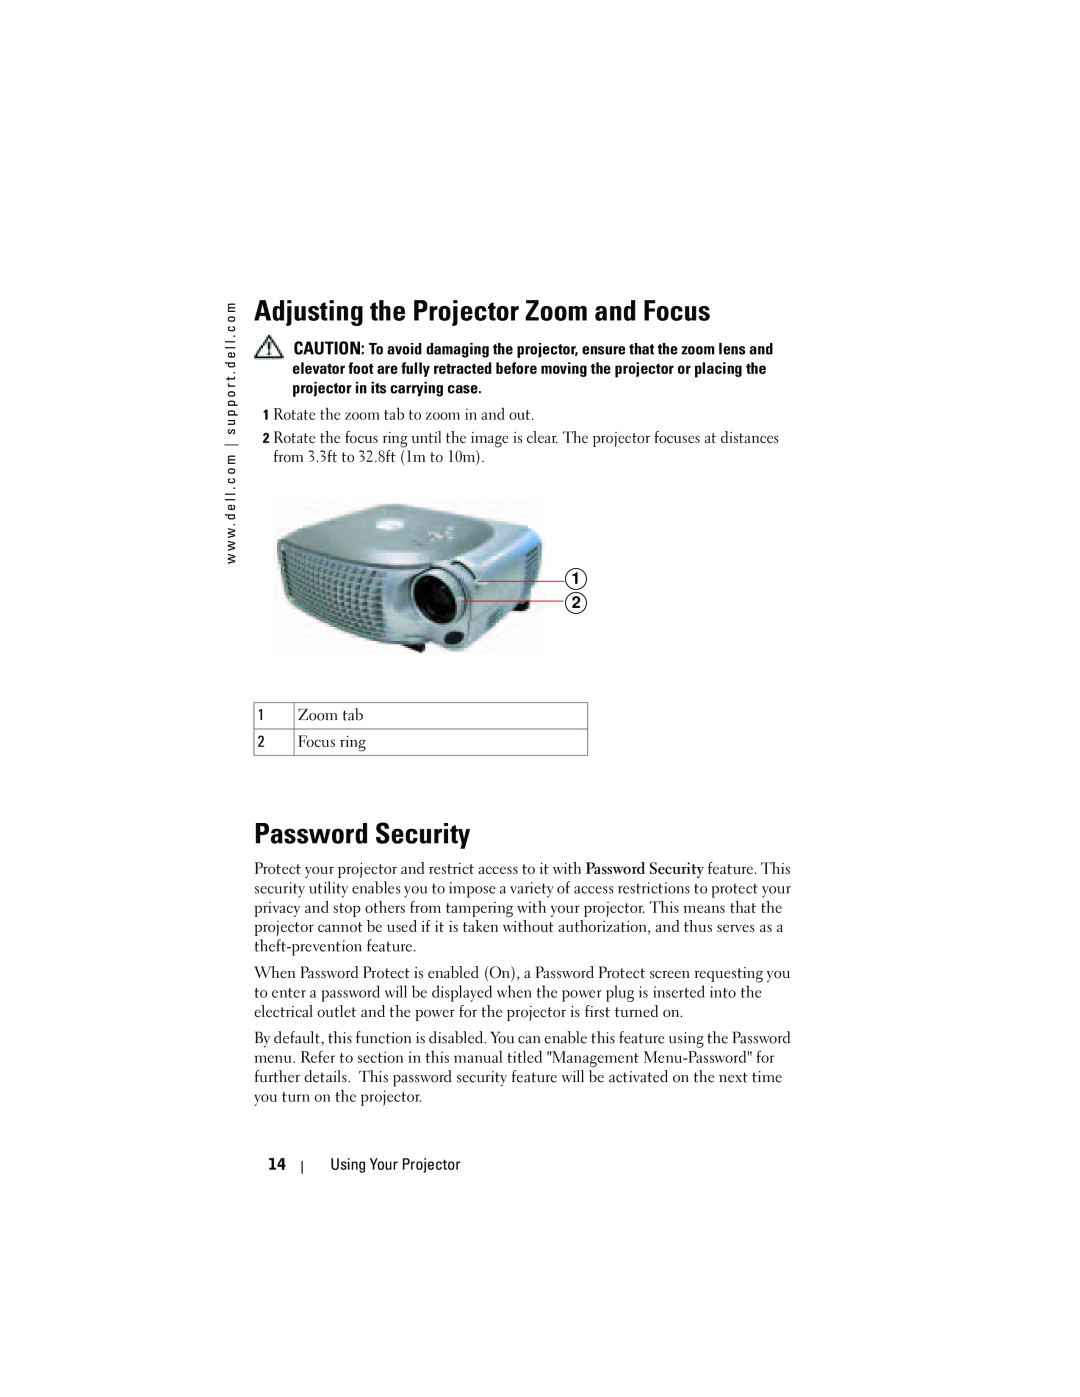 Dell 1200MP owner manual Adjusting the Projector Zoom and Focus, Password Security, Using Your Projector 